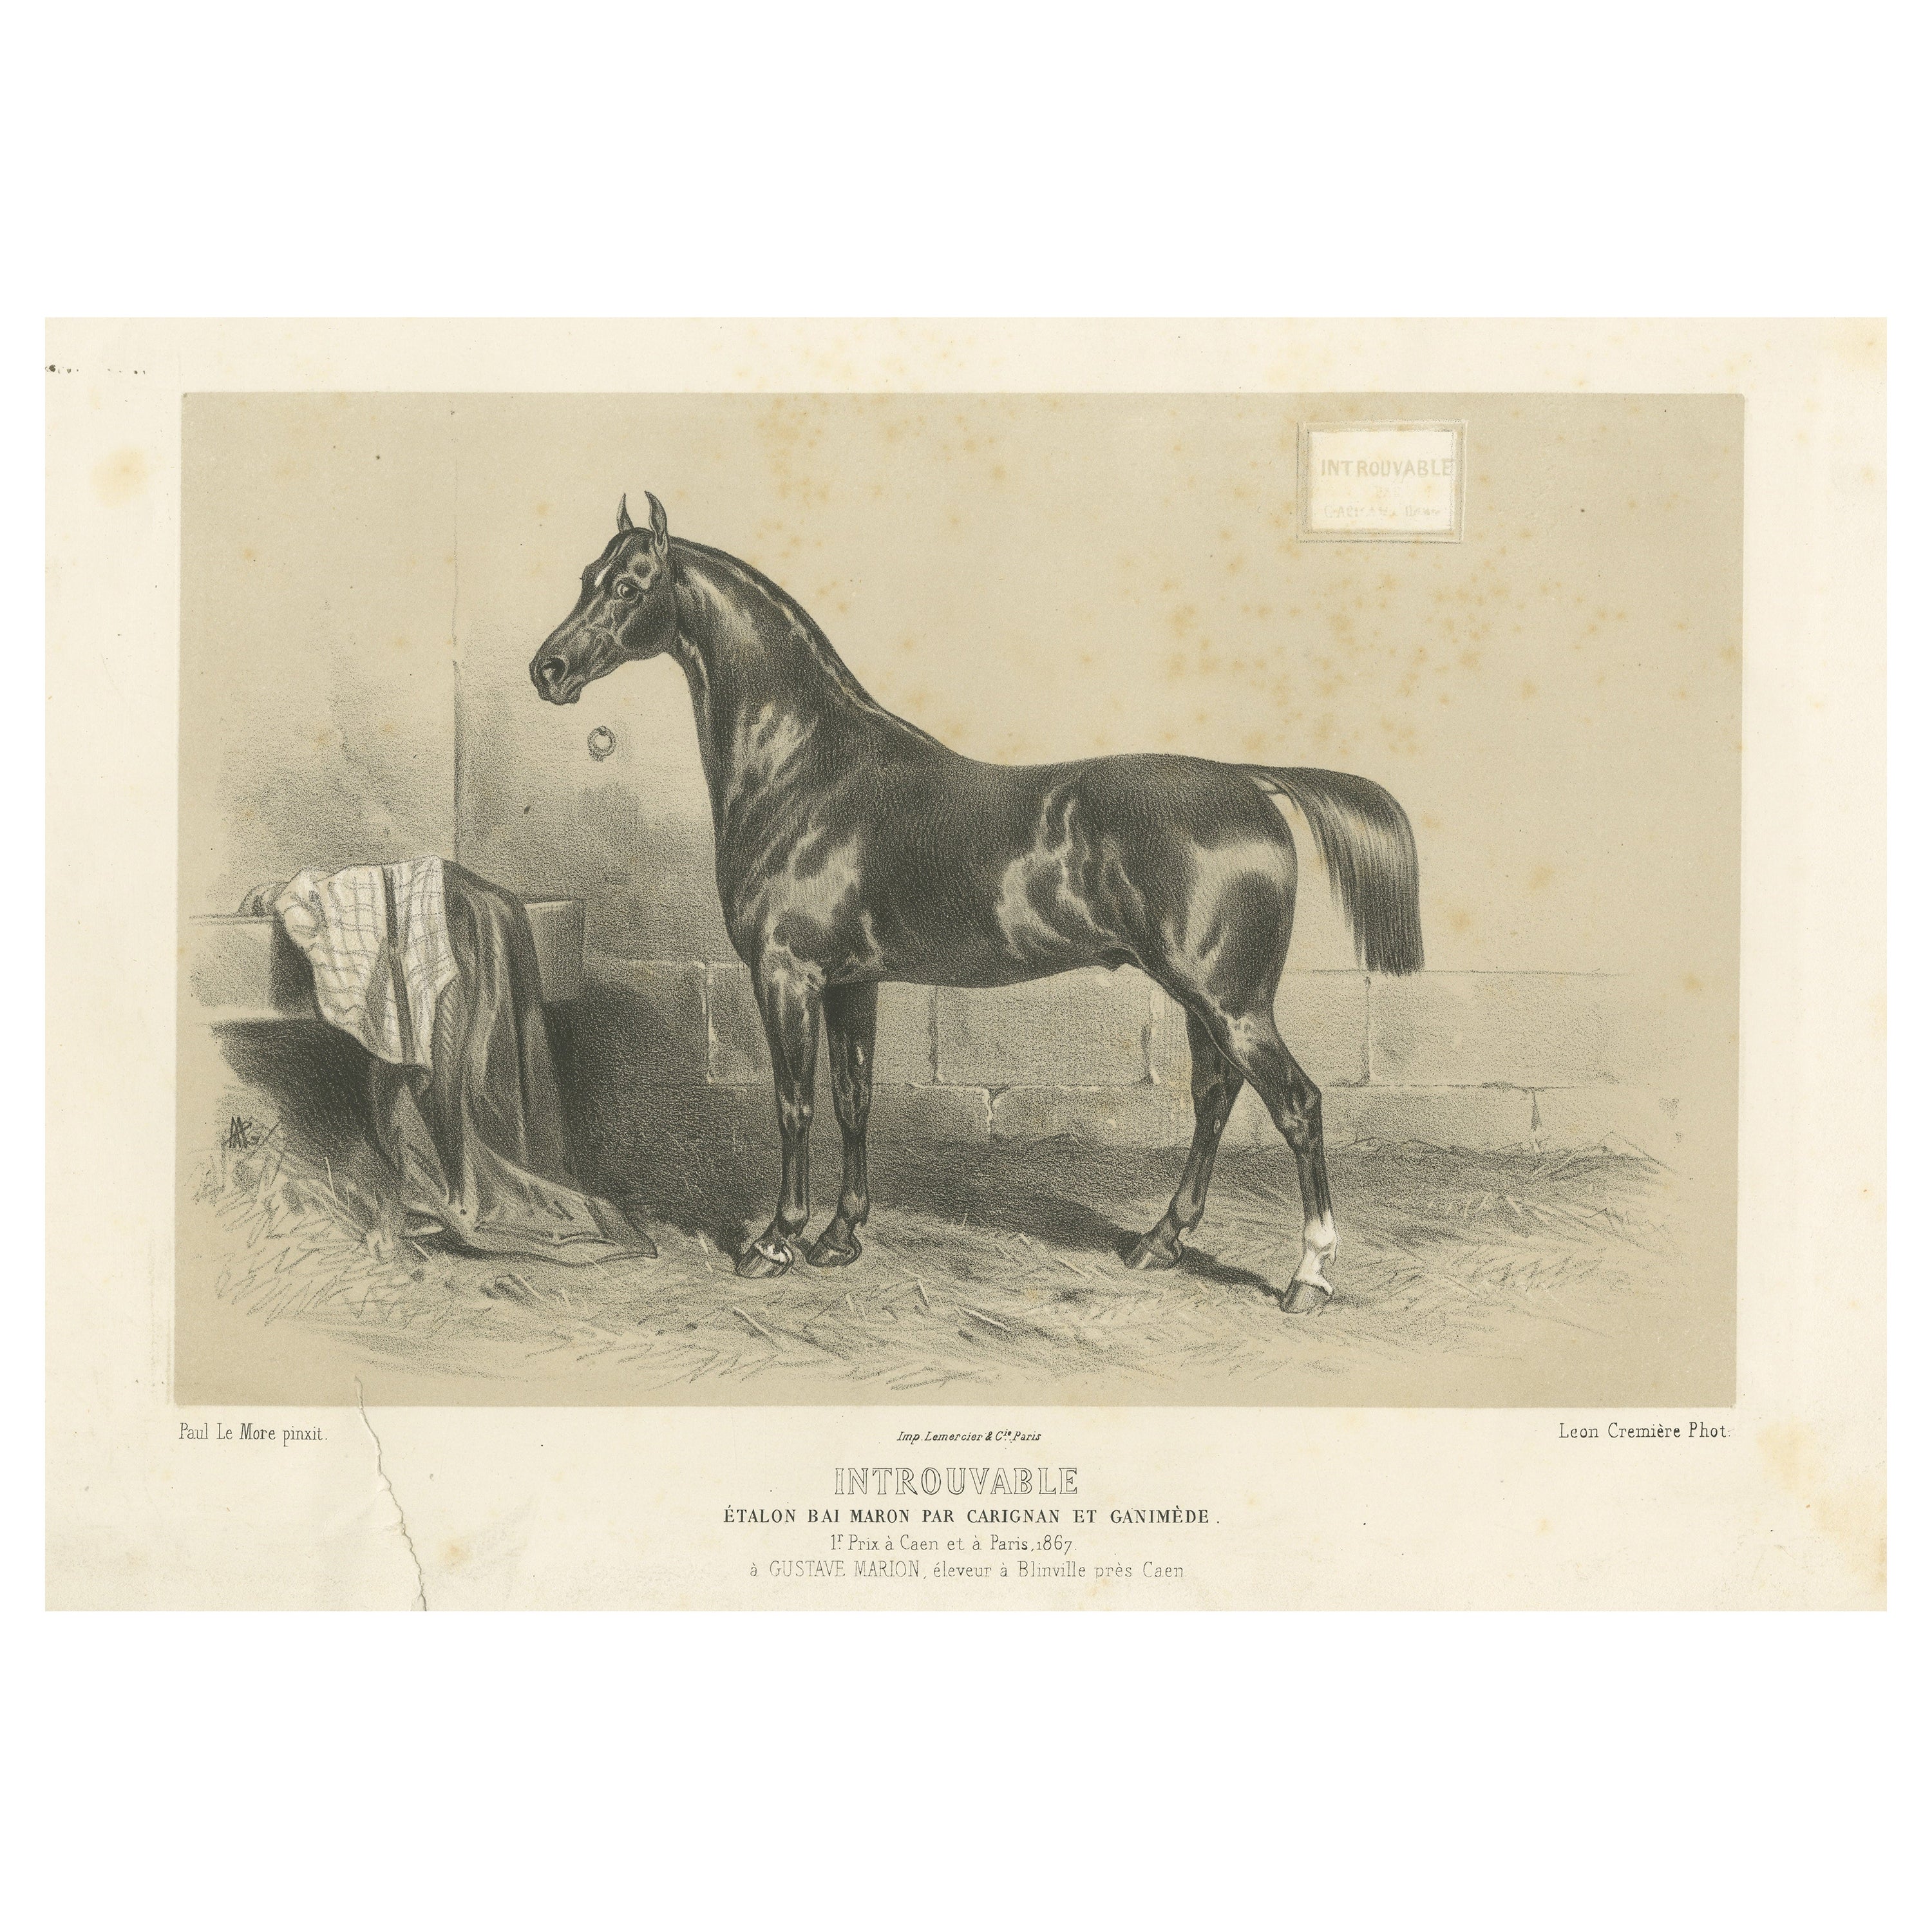 Antique Lithograph of the Horse 'Introuvable' For Sale